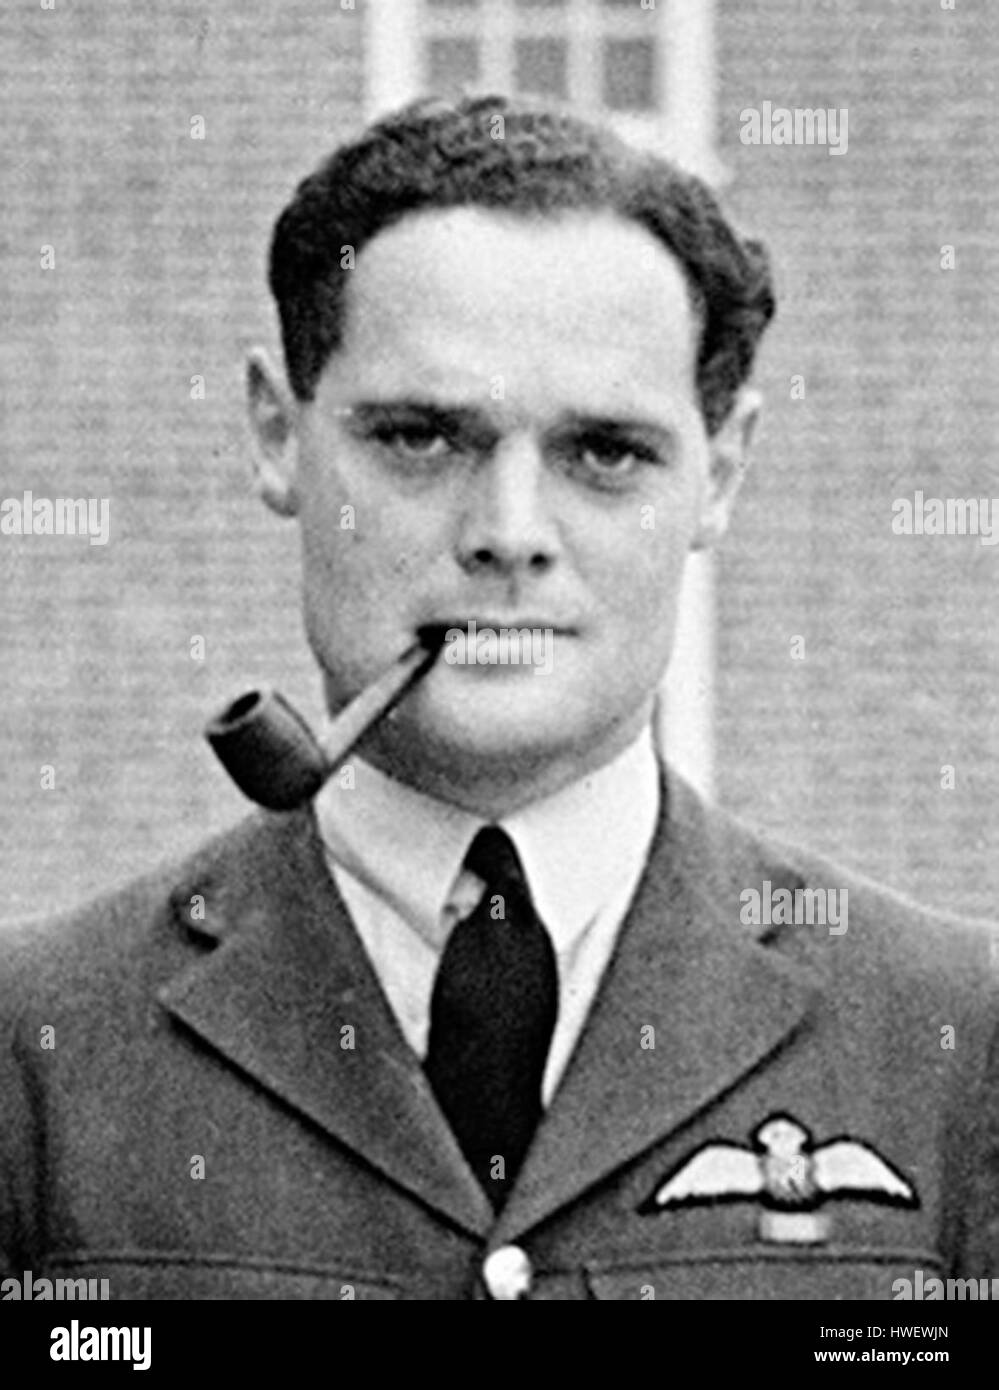 Sir Douglas Bader, flying ace during the Second World War. Stock Photo